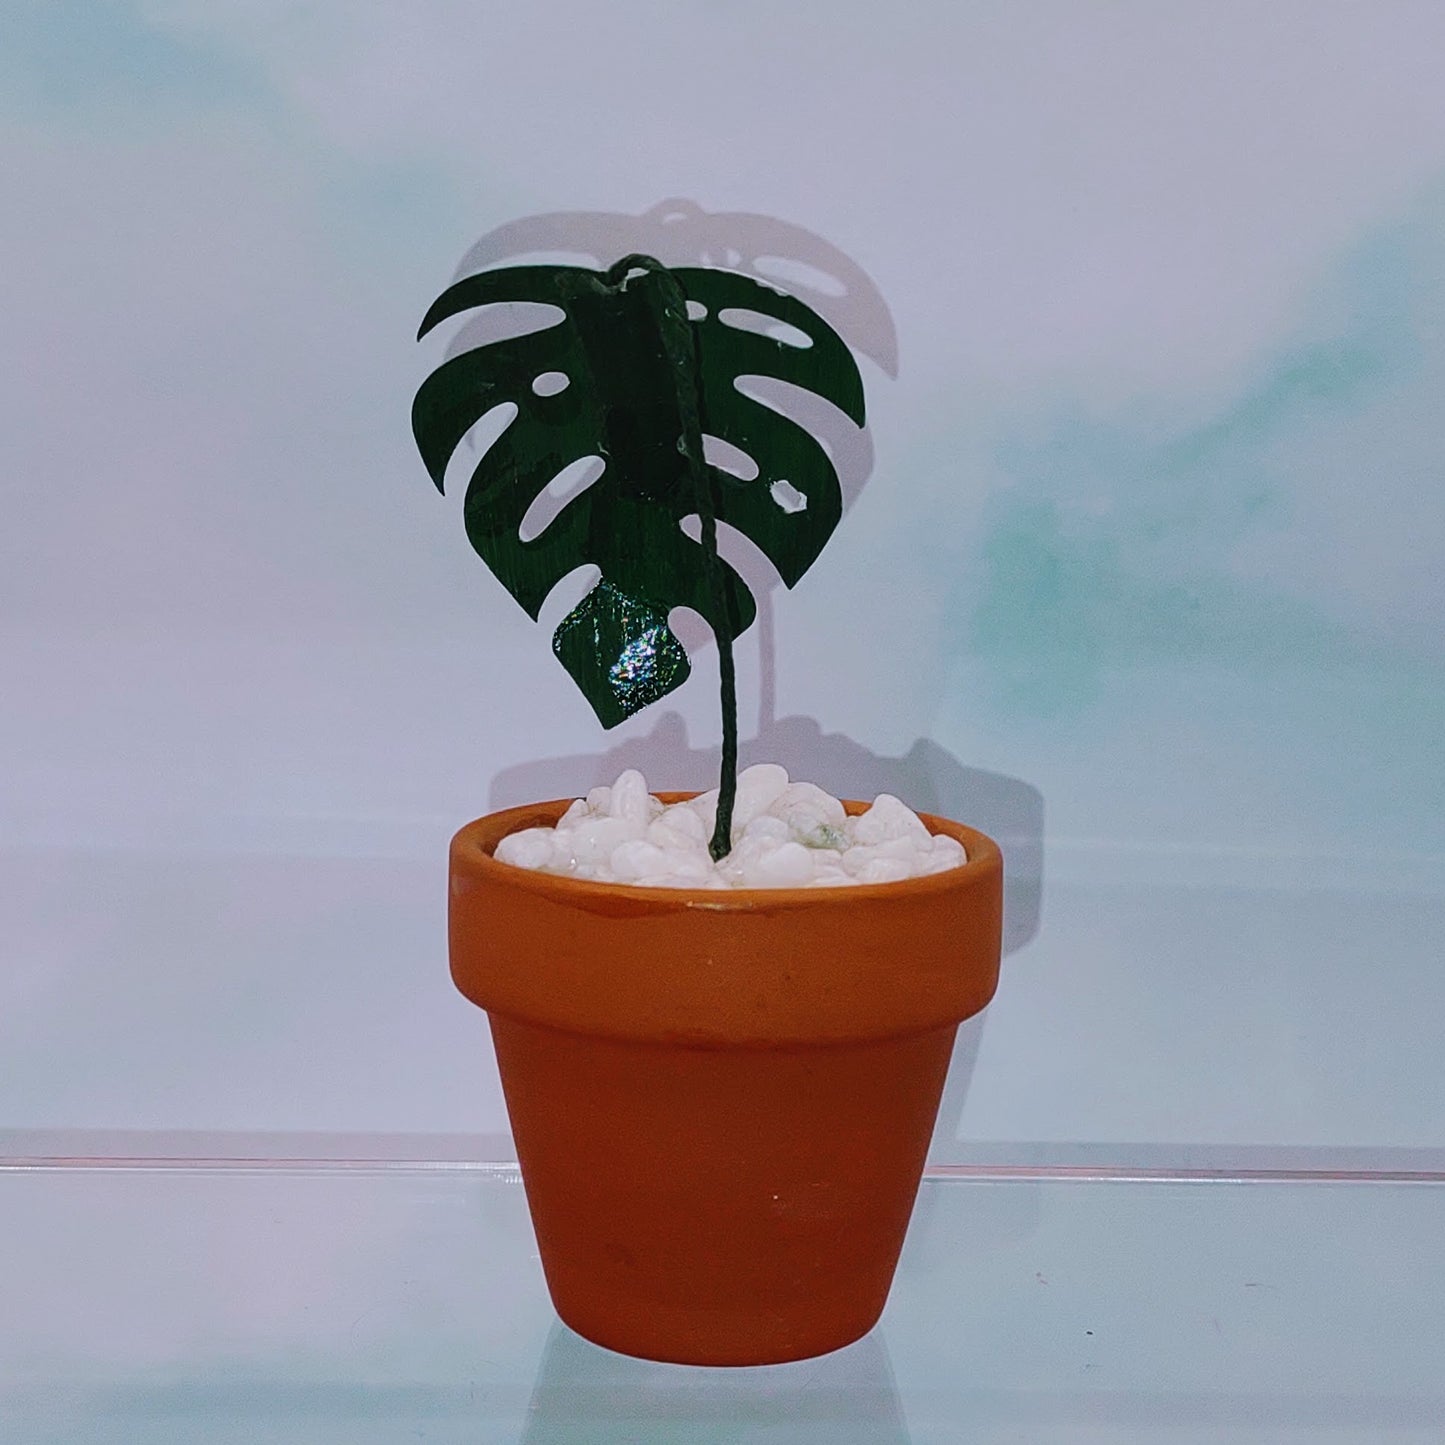 Tiny Magical Monstera Albo Paper House Plant in Clay Pot- DECORATIVE